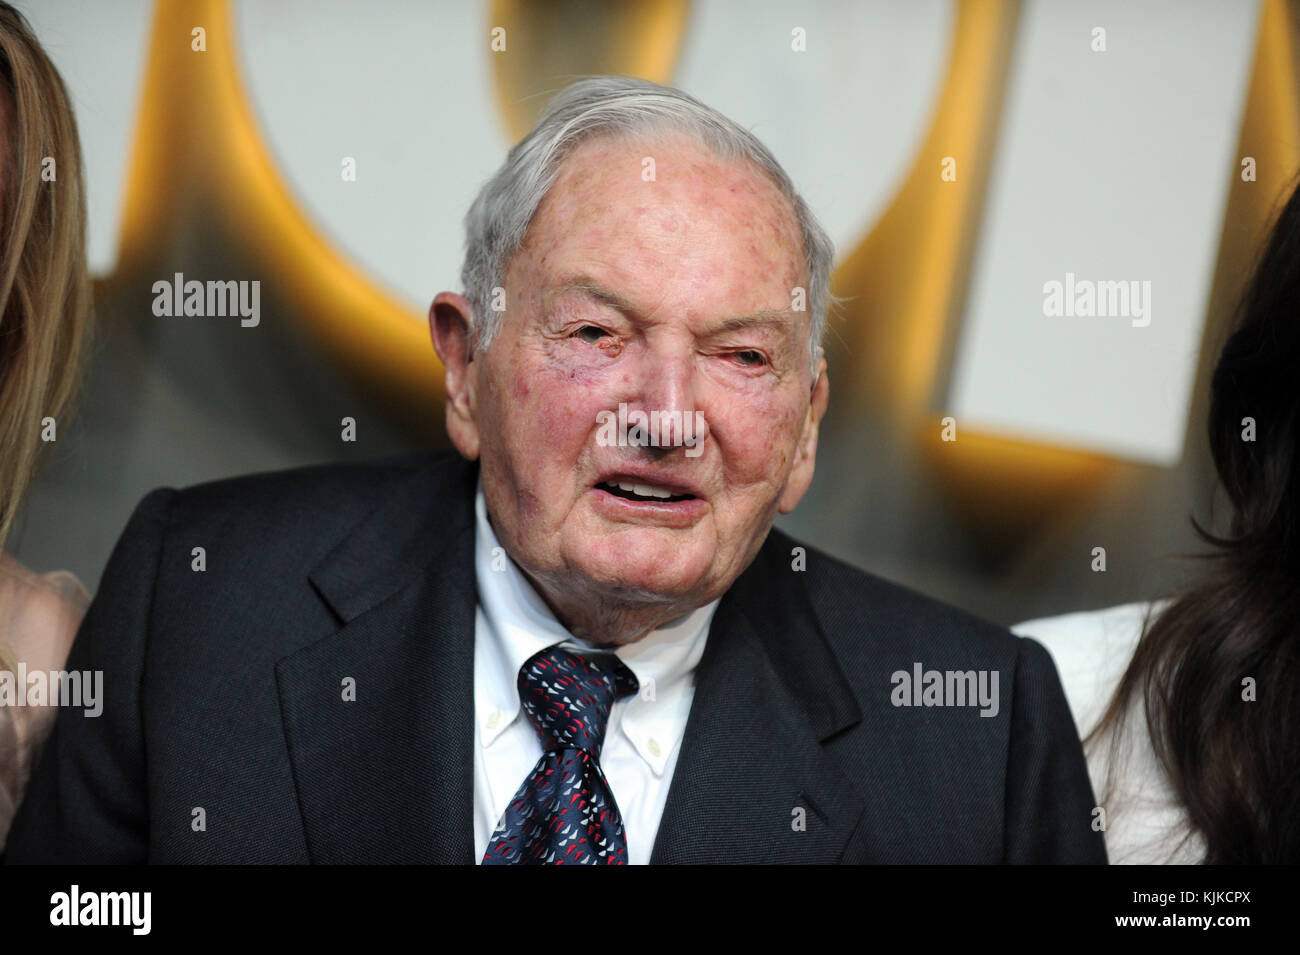 NEW YORK, NY - JUNE 01: David Rockefeller Sr. attends the 2016 Museum Of Modern Art Party In The Garden at Museum of Modern Art on June 1, 2016 in New York City.  People:  David Rockefeller Sr. Stock Photo